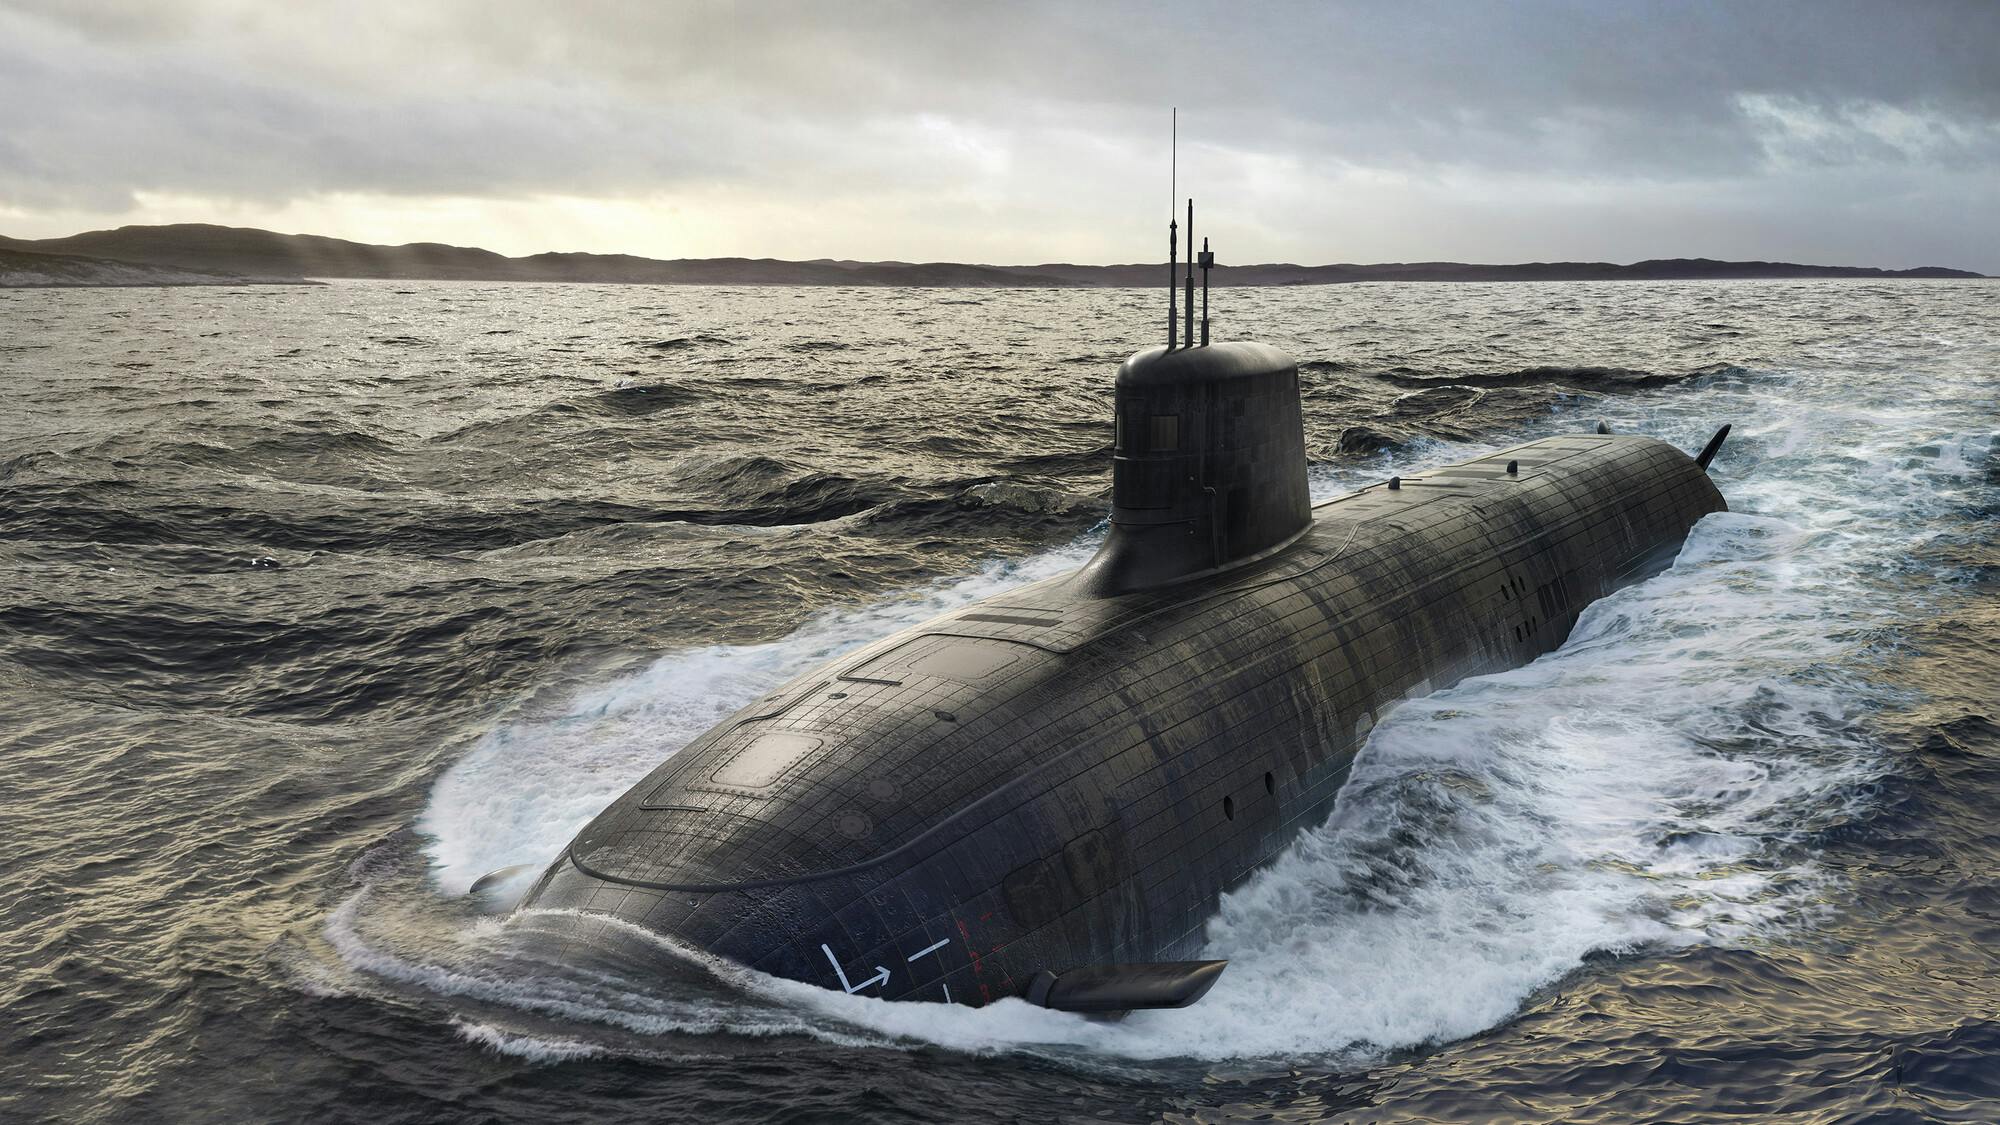 Australia selects BAE to build nuclear powered submarines